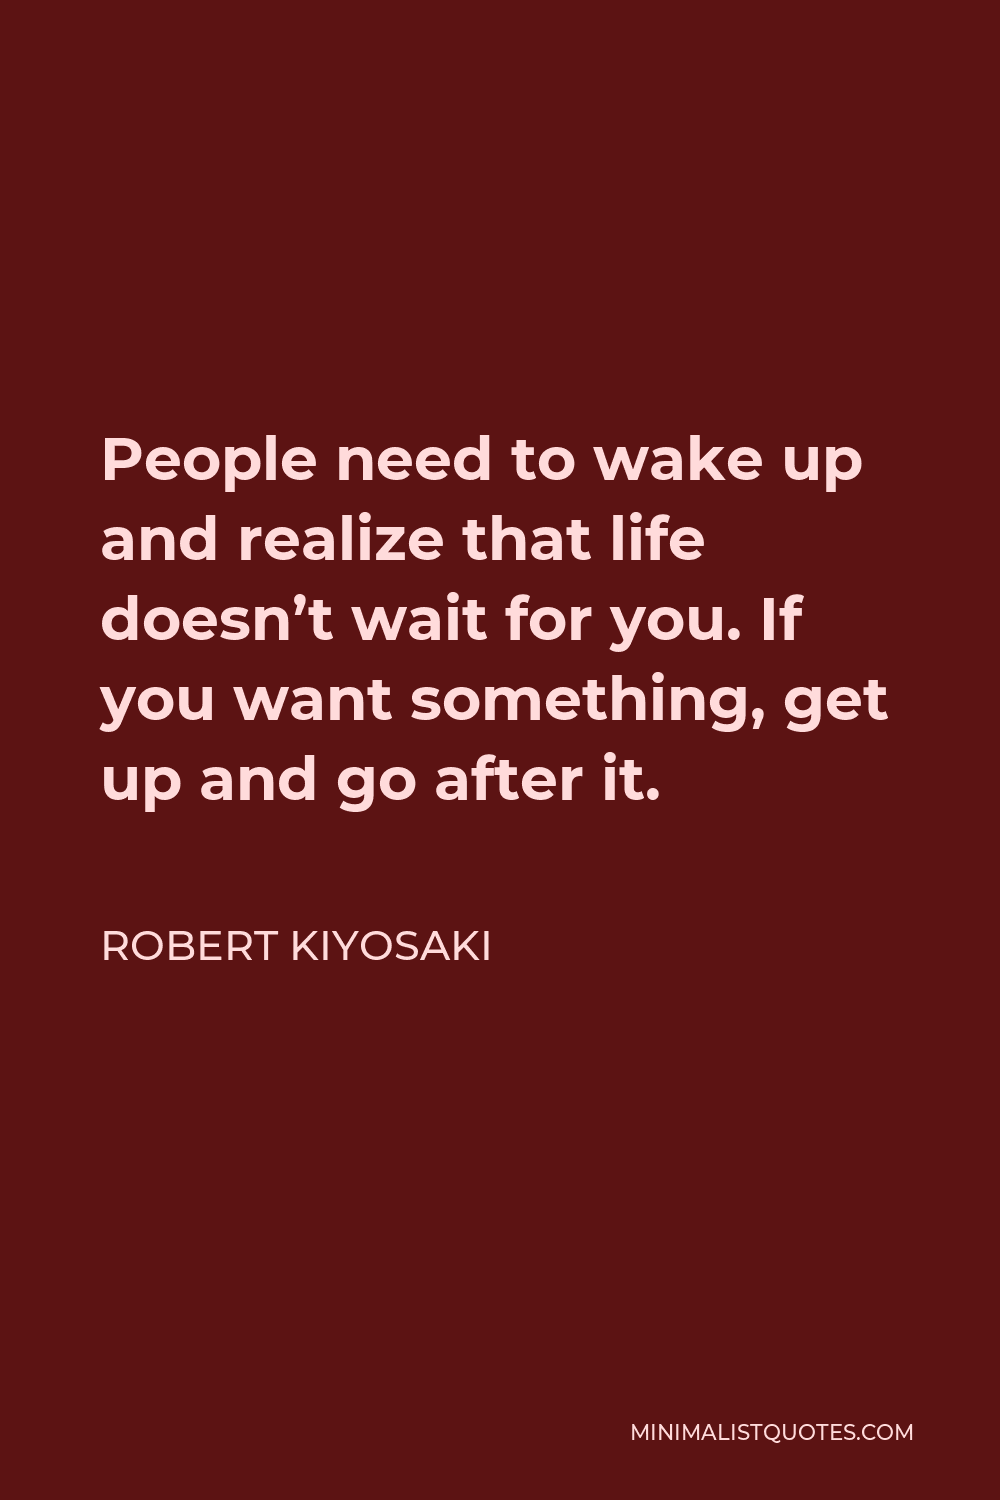 Robert Kiyosaki Quote - People need to wake up and realize that life doesn’t wait for you. If you want something, get up and go after it.